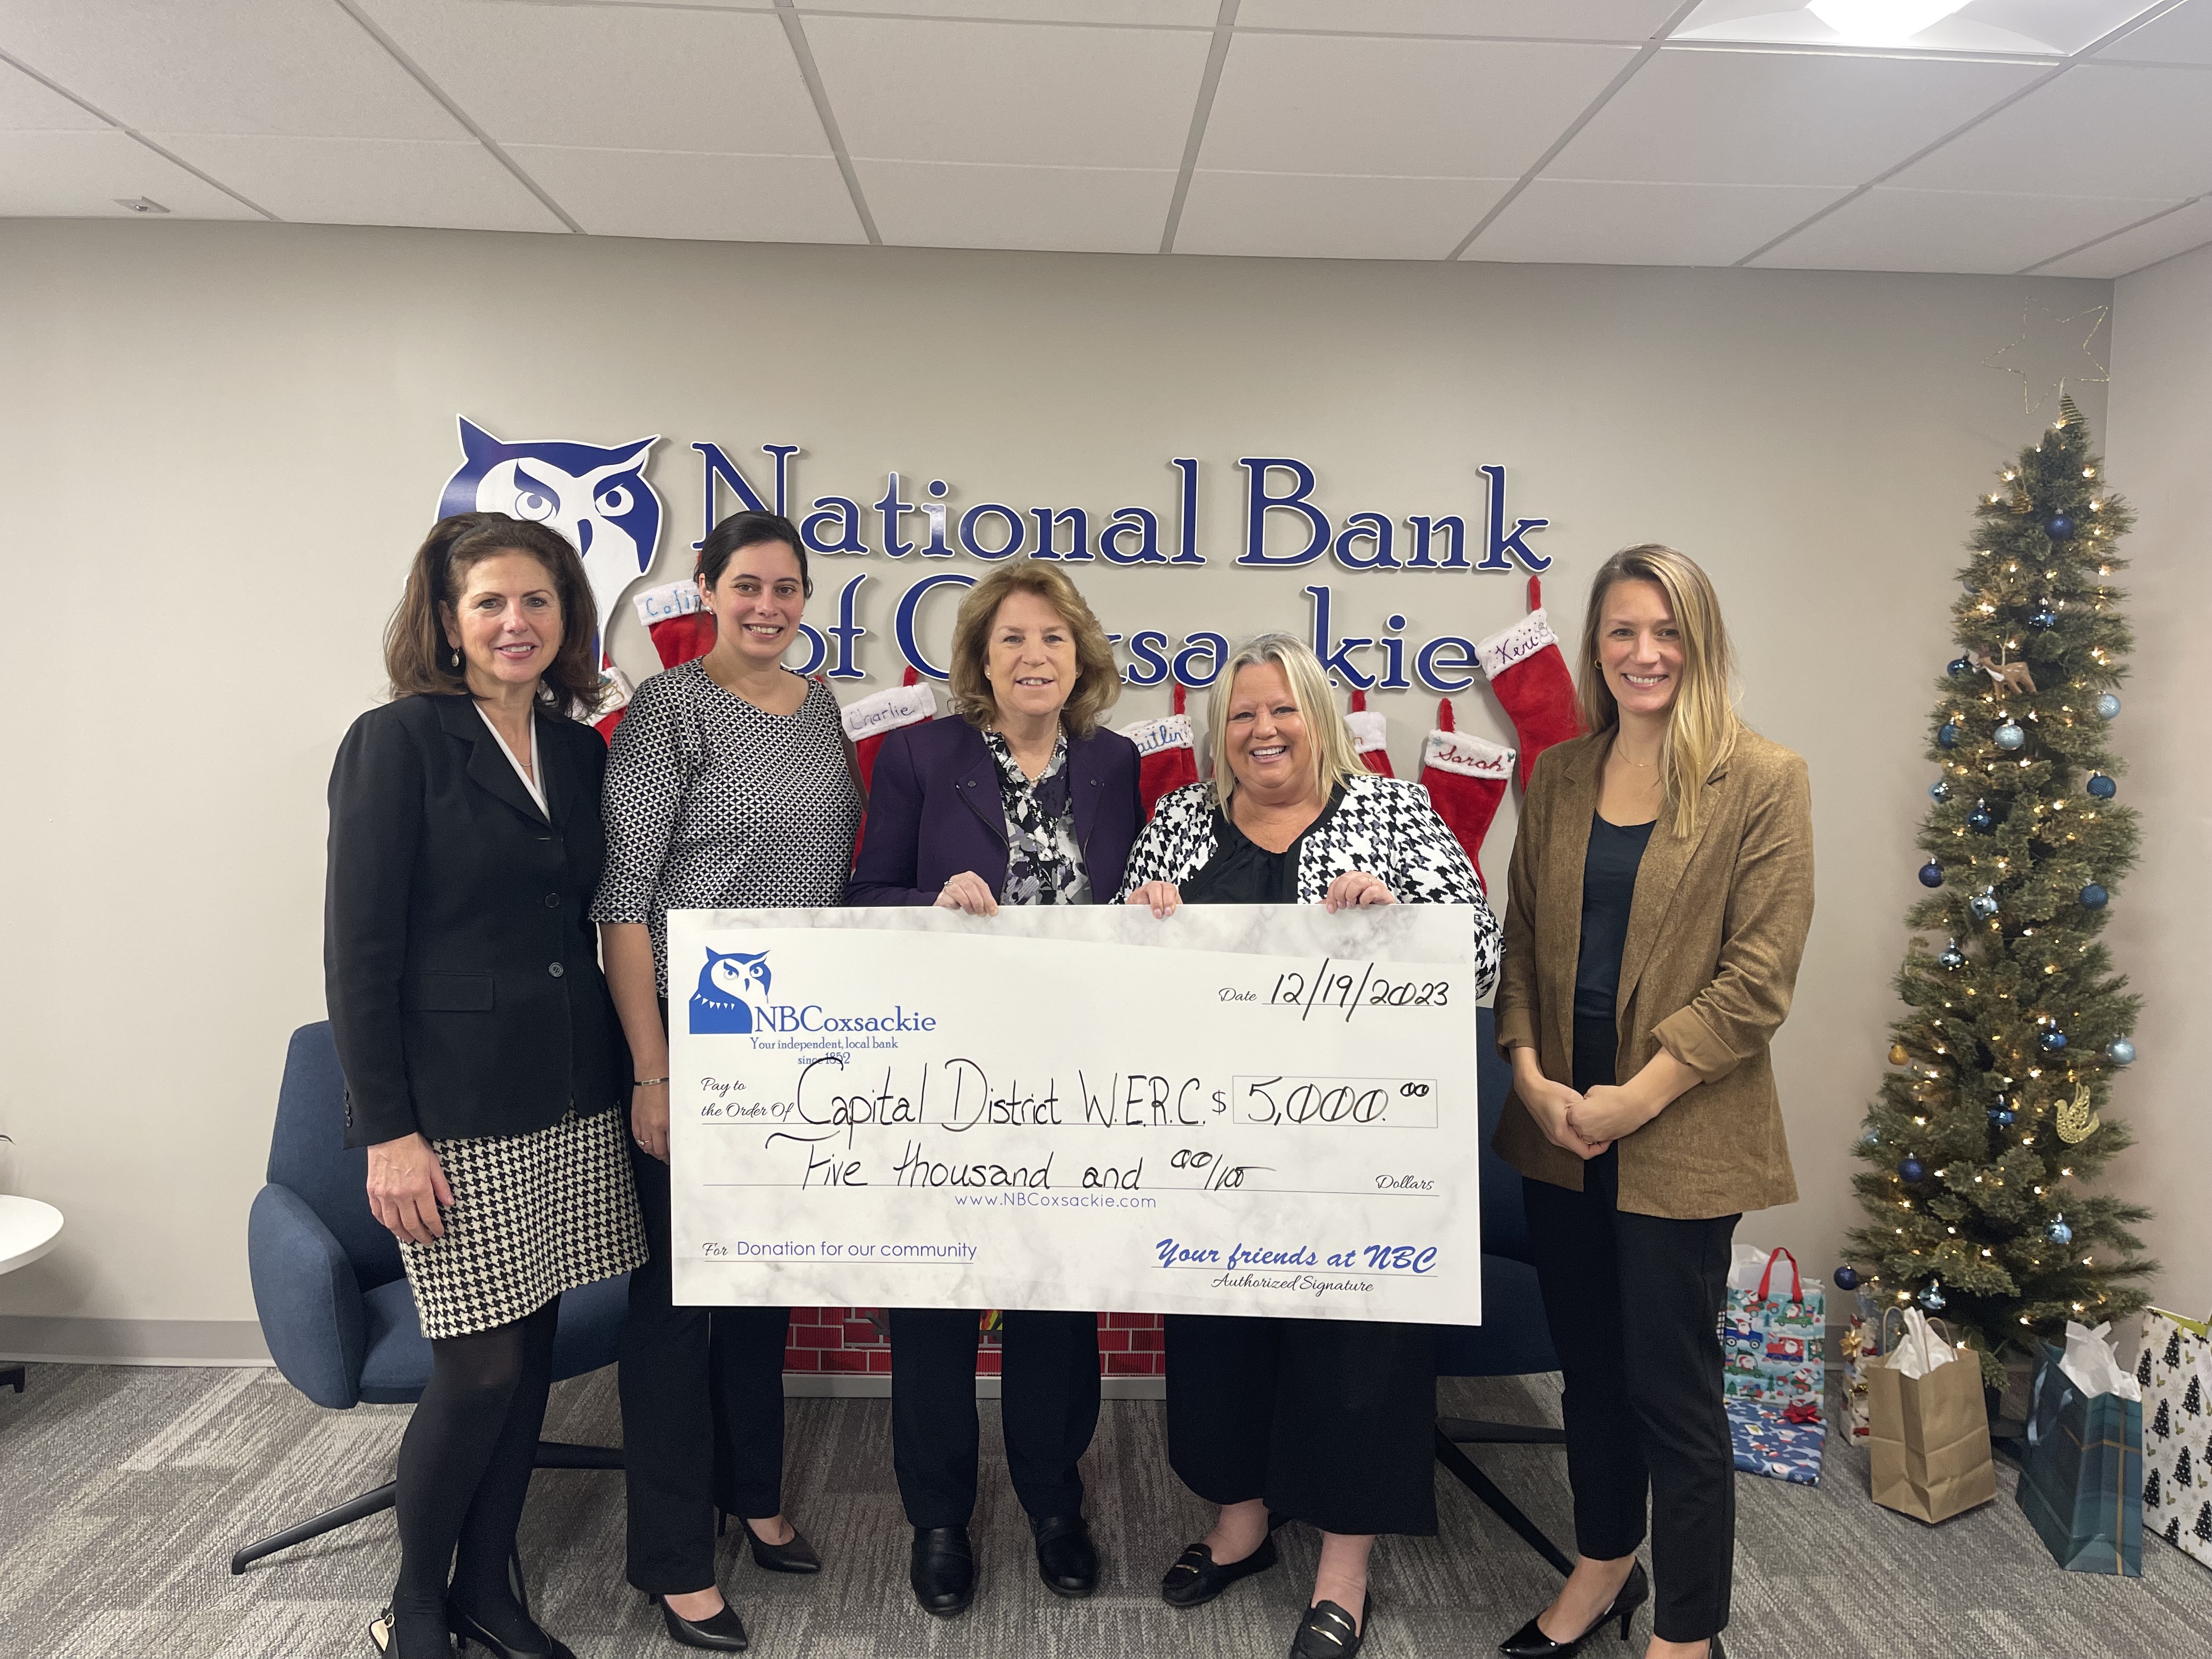 Image for Capital District WERC (Woman’s’ Employment & Resource Center) receives funds from National Bank of Coxsackie